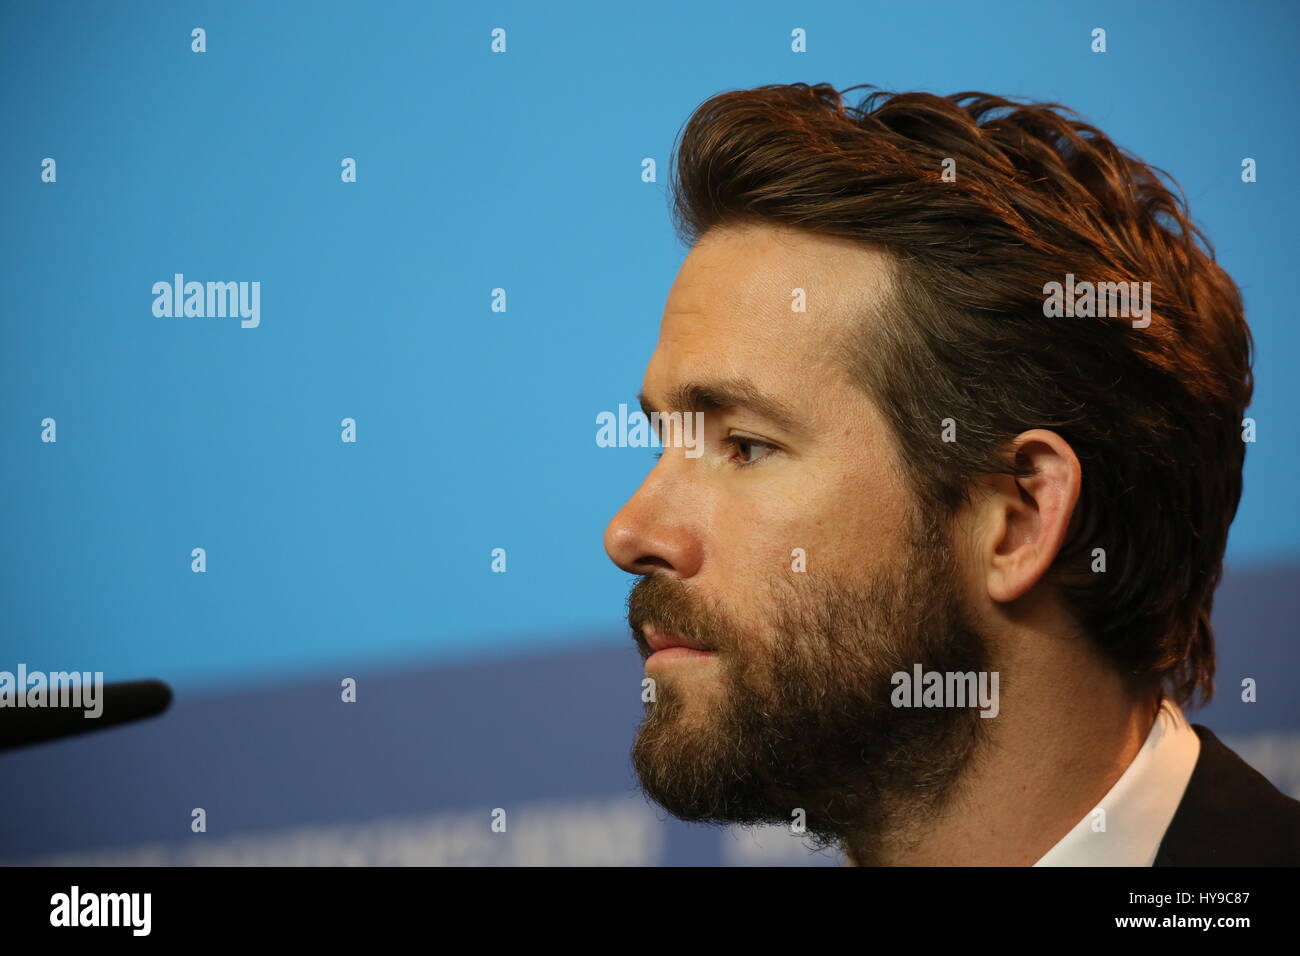 Berlin, Germany, February 9th, 2015: Berlinale conference of the film 'Woman in Gold'. Stock Photo